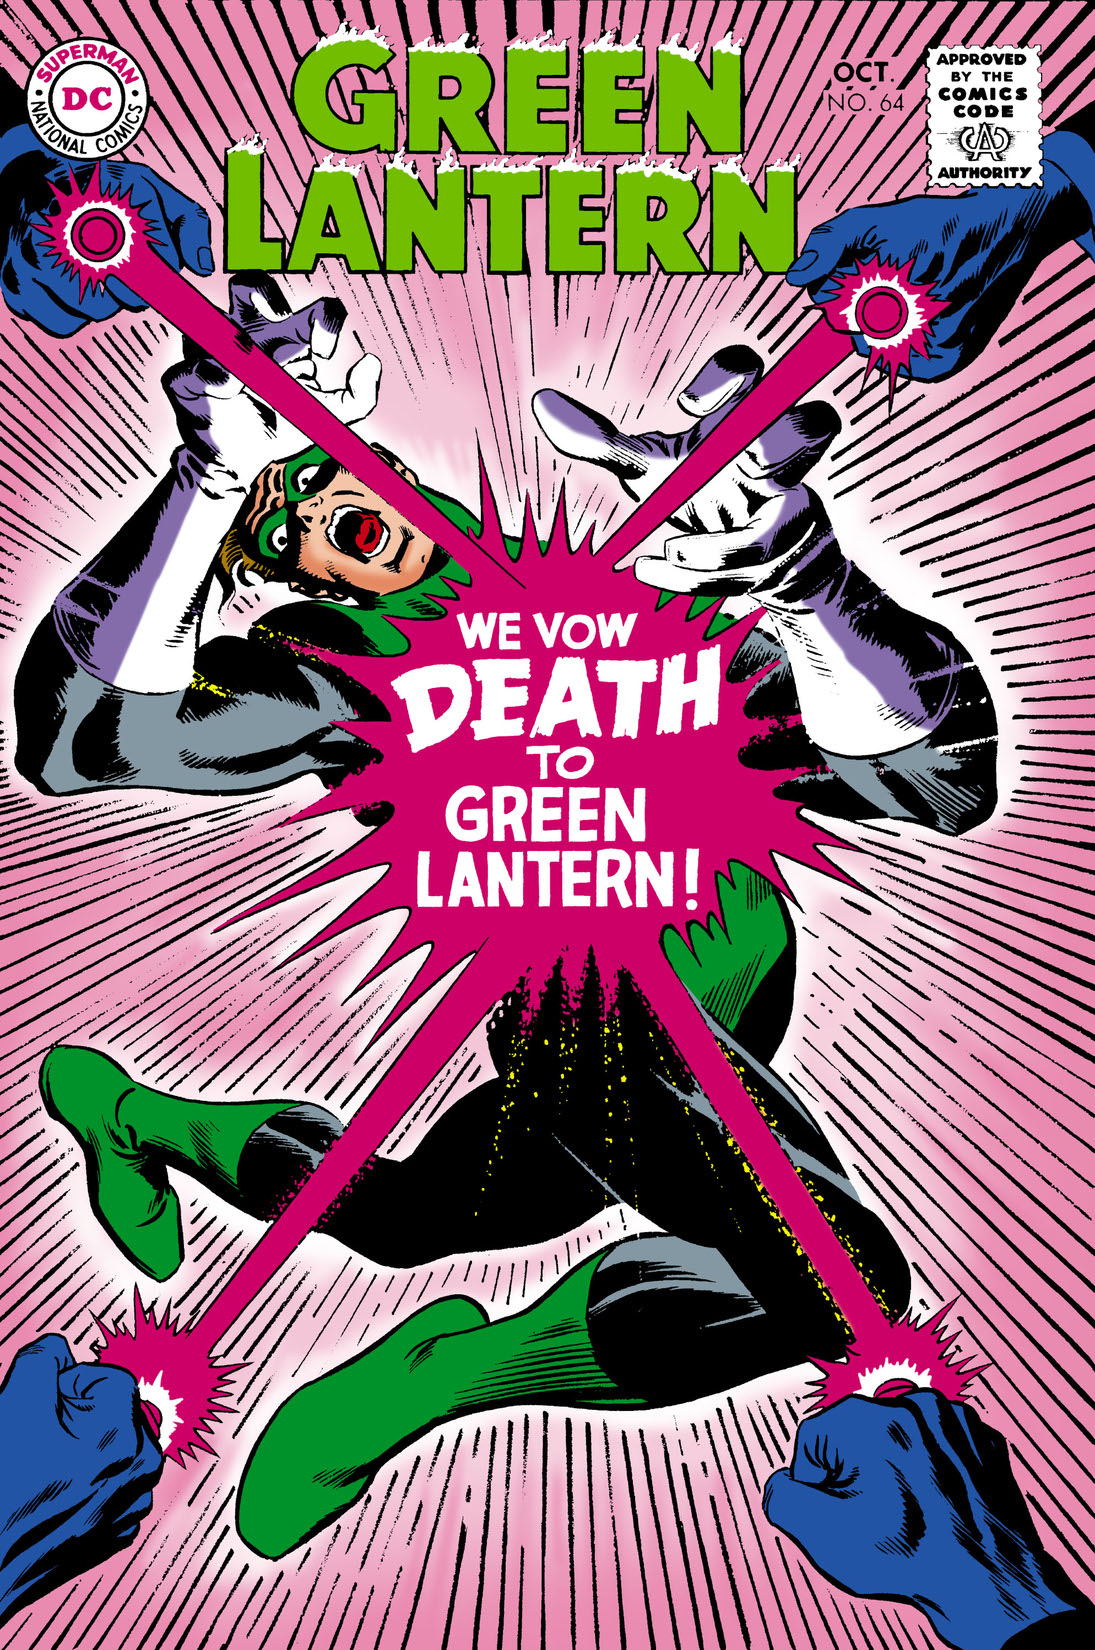 Green Lantern (1960-) #64 preview images